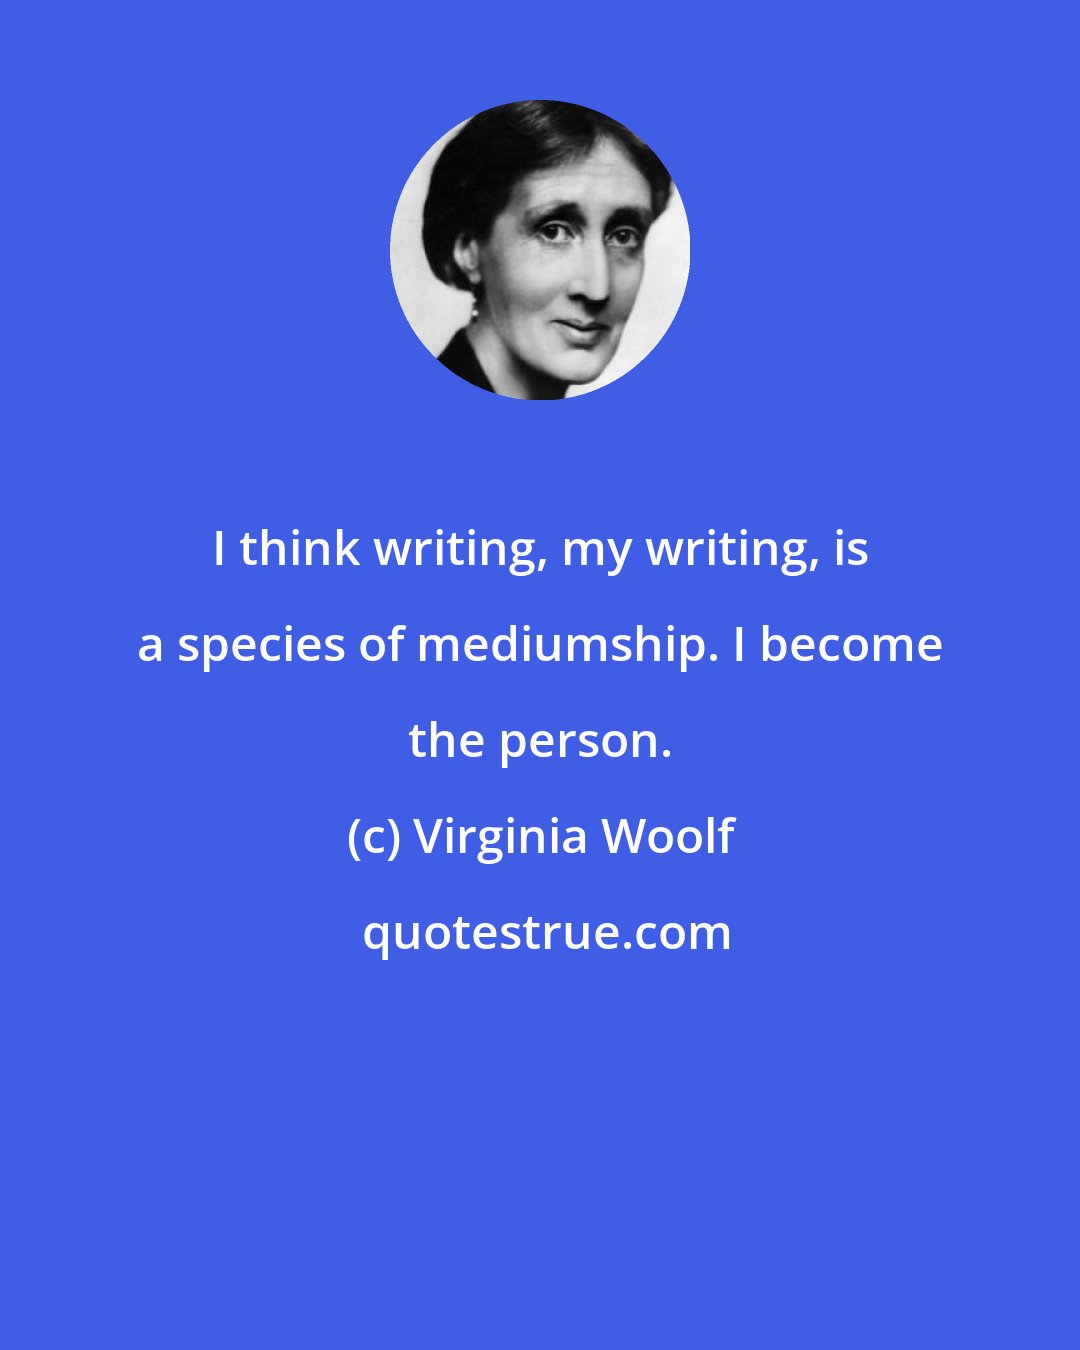 Virginia Woolf: I think writing, my writing, is a species of mediumship. I become the person.